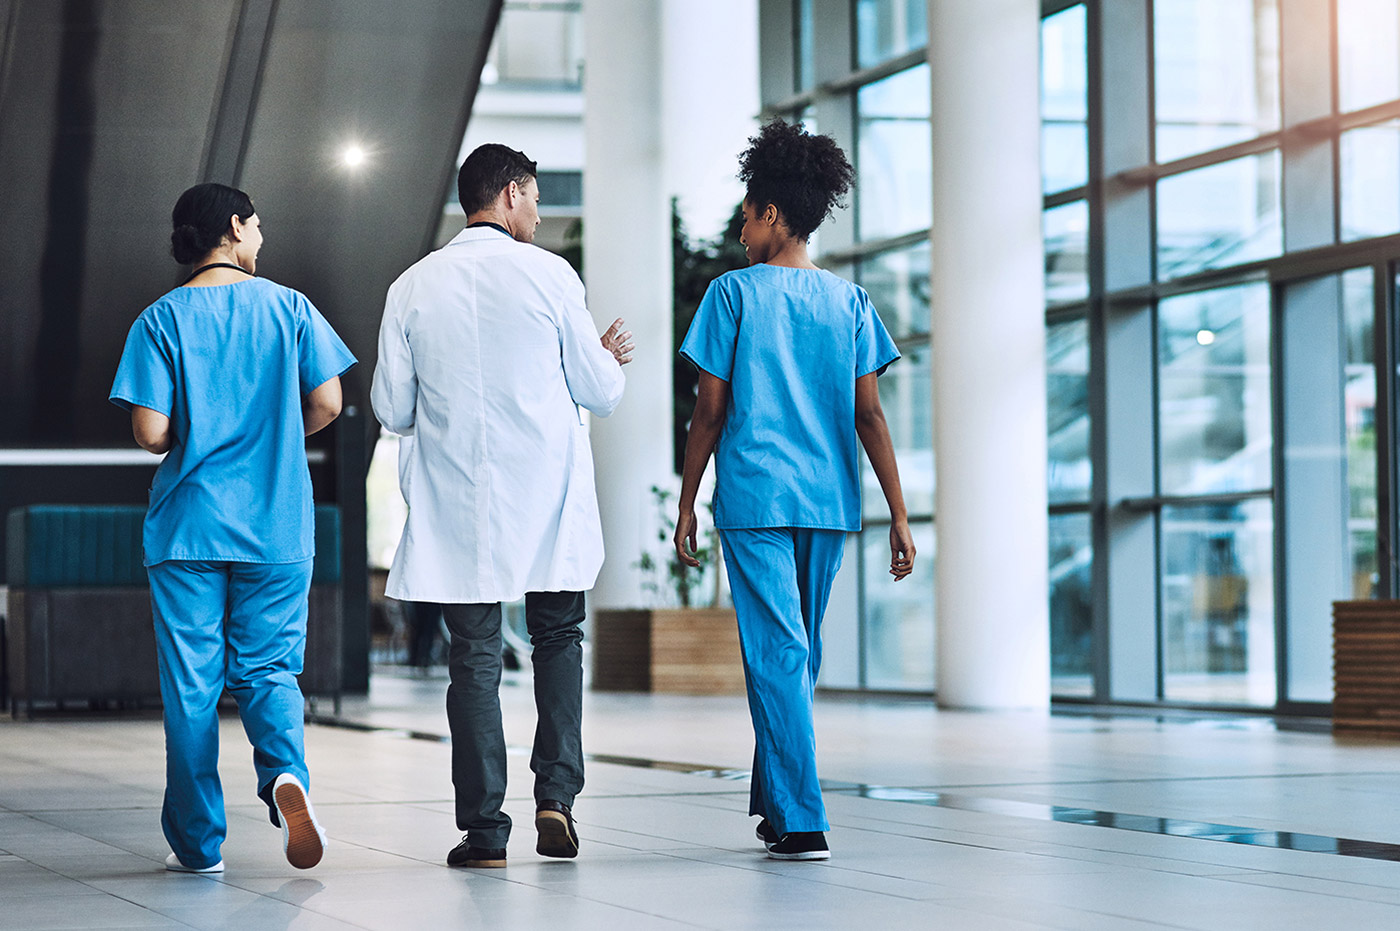 Three healthcare workers walking together.